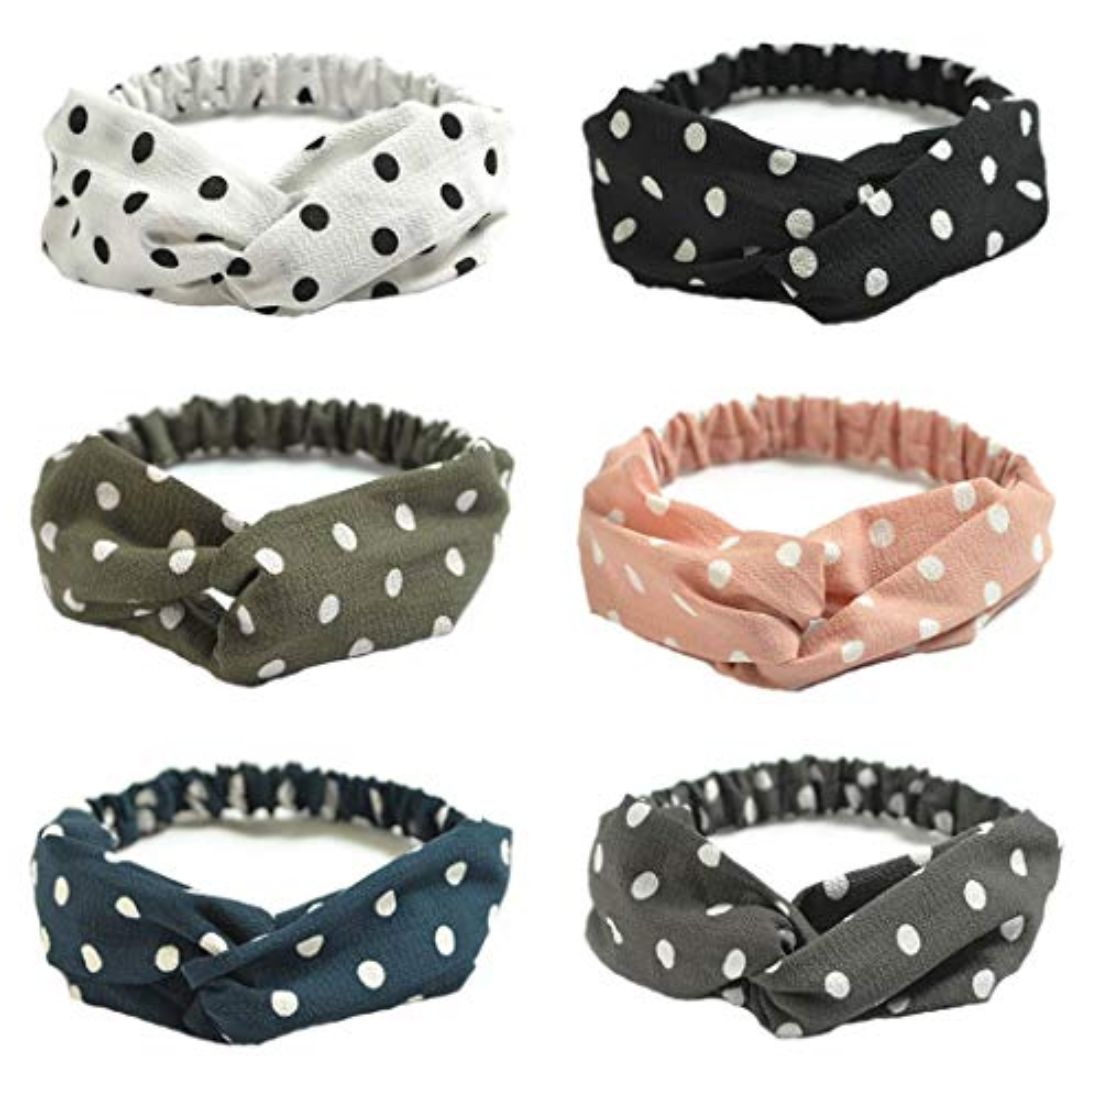 Buy Catery Boho Headbands Dot Criss Cross Headband Headpiecce Vintage  Stylish Head Wrap Hair Band Cotton Elastic Fabric Hairbands Fashion  Accessories For Women And Girls – Pack Of 6 Online in UAE |